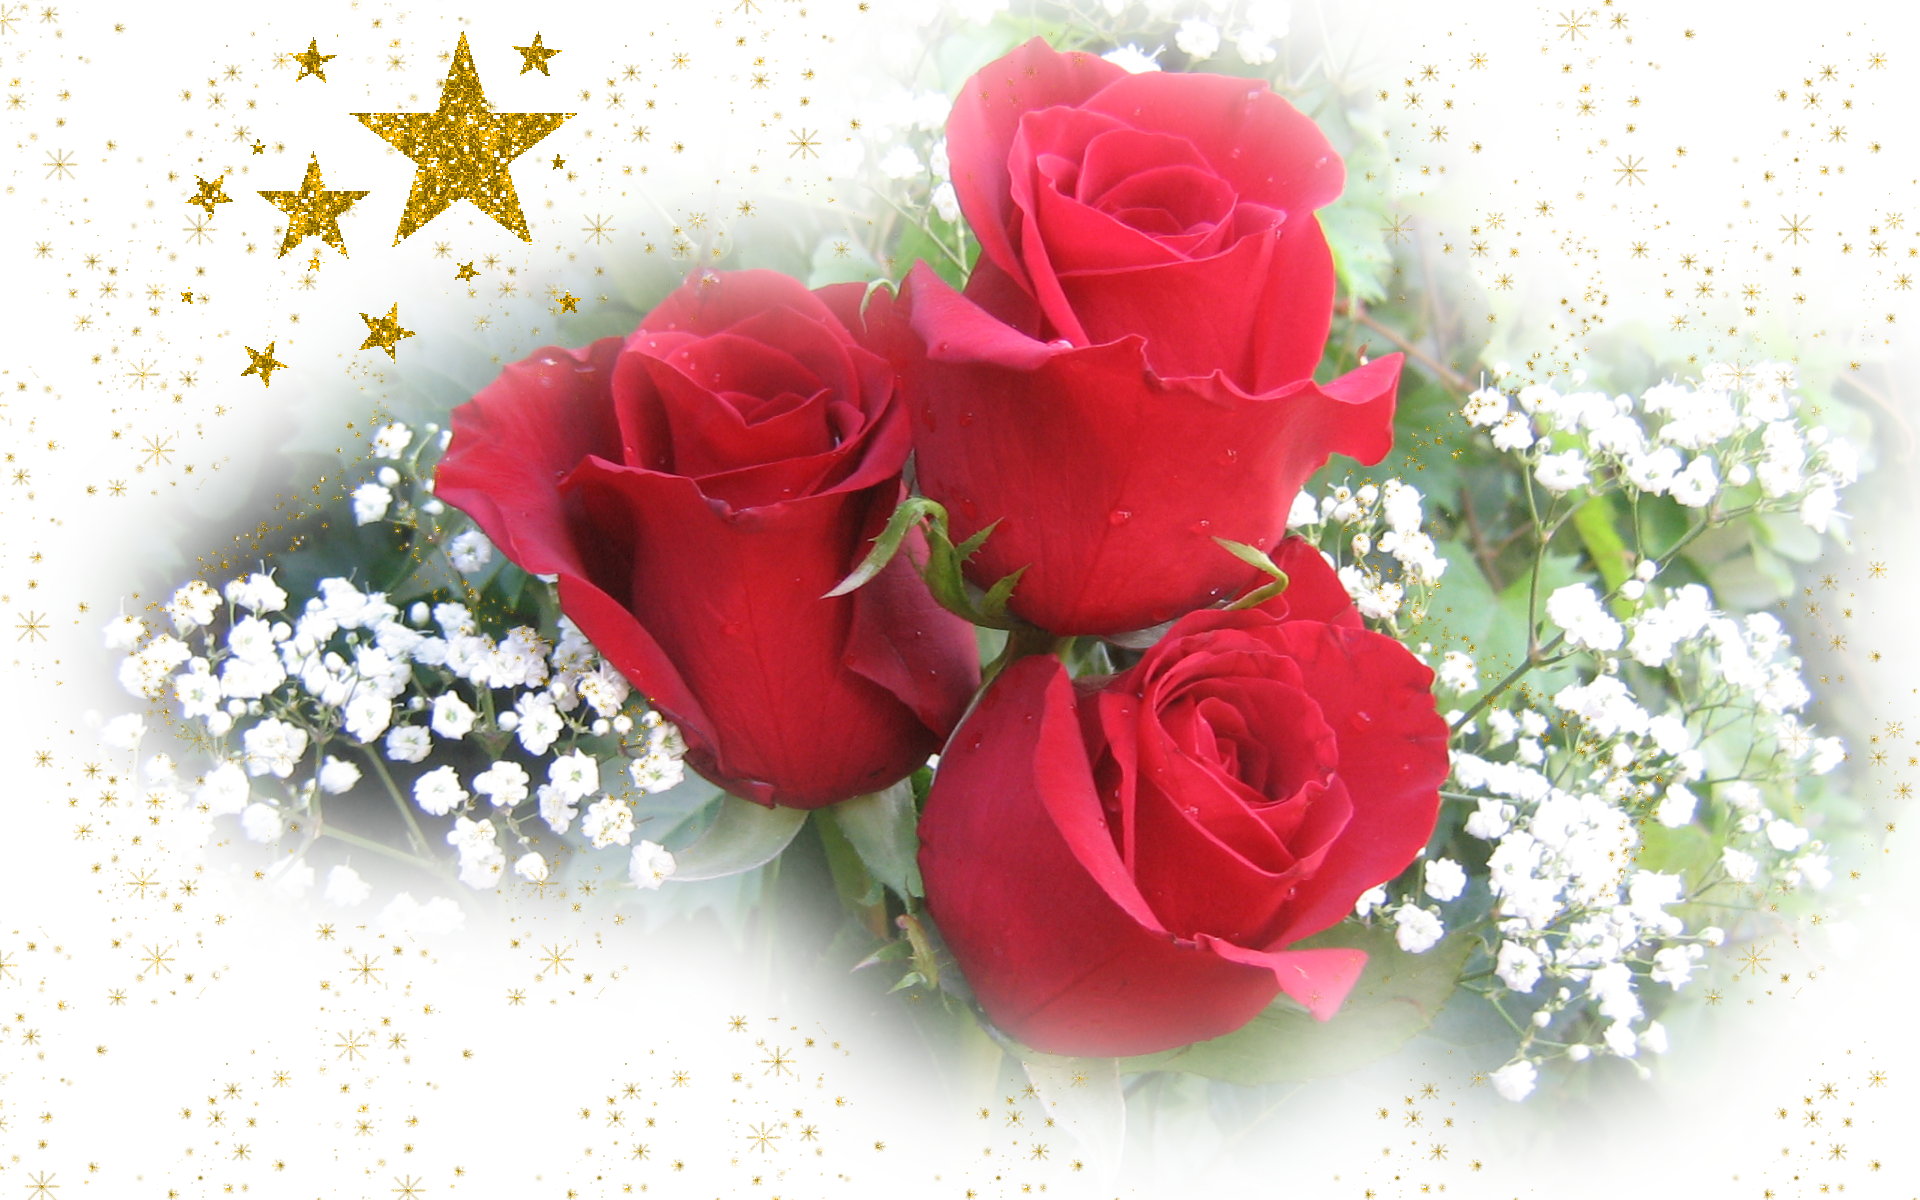 Merry Christmas wallpapers with beautiful roses and shiny stars 1920x1200